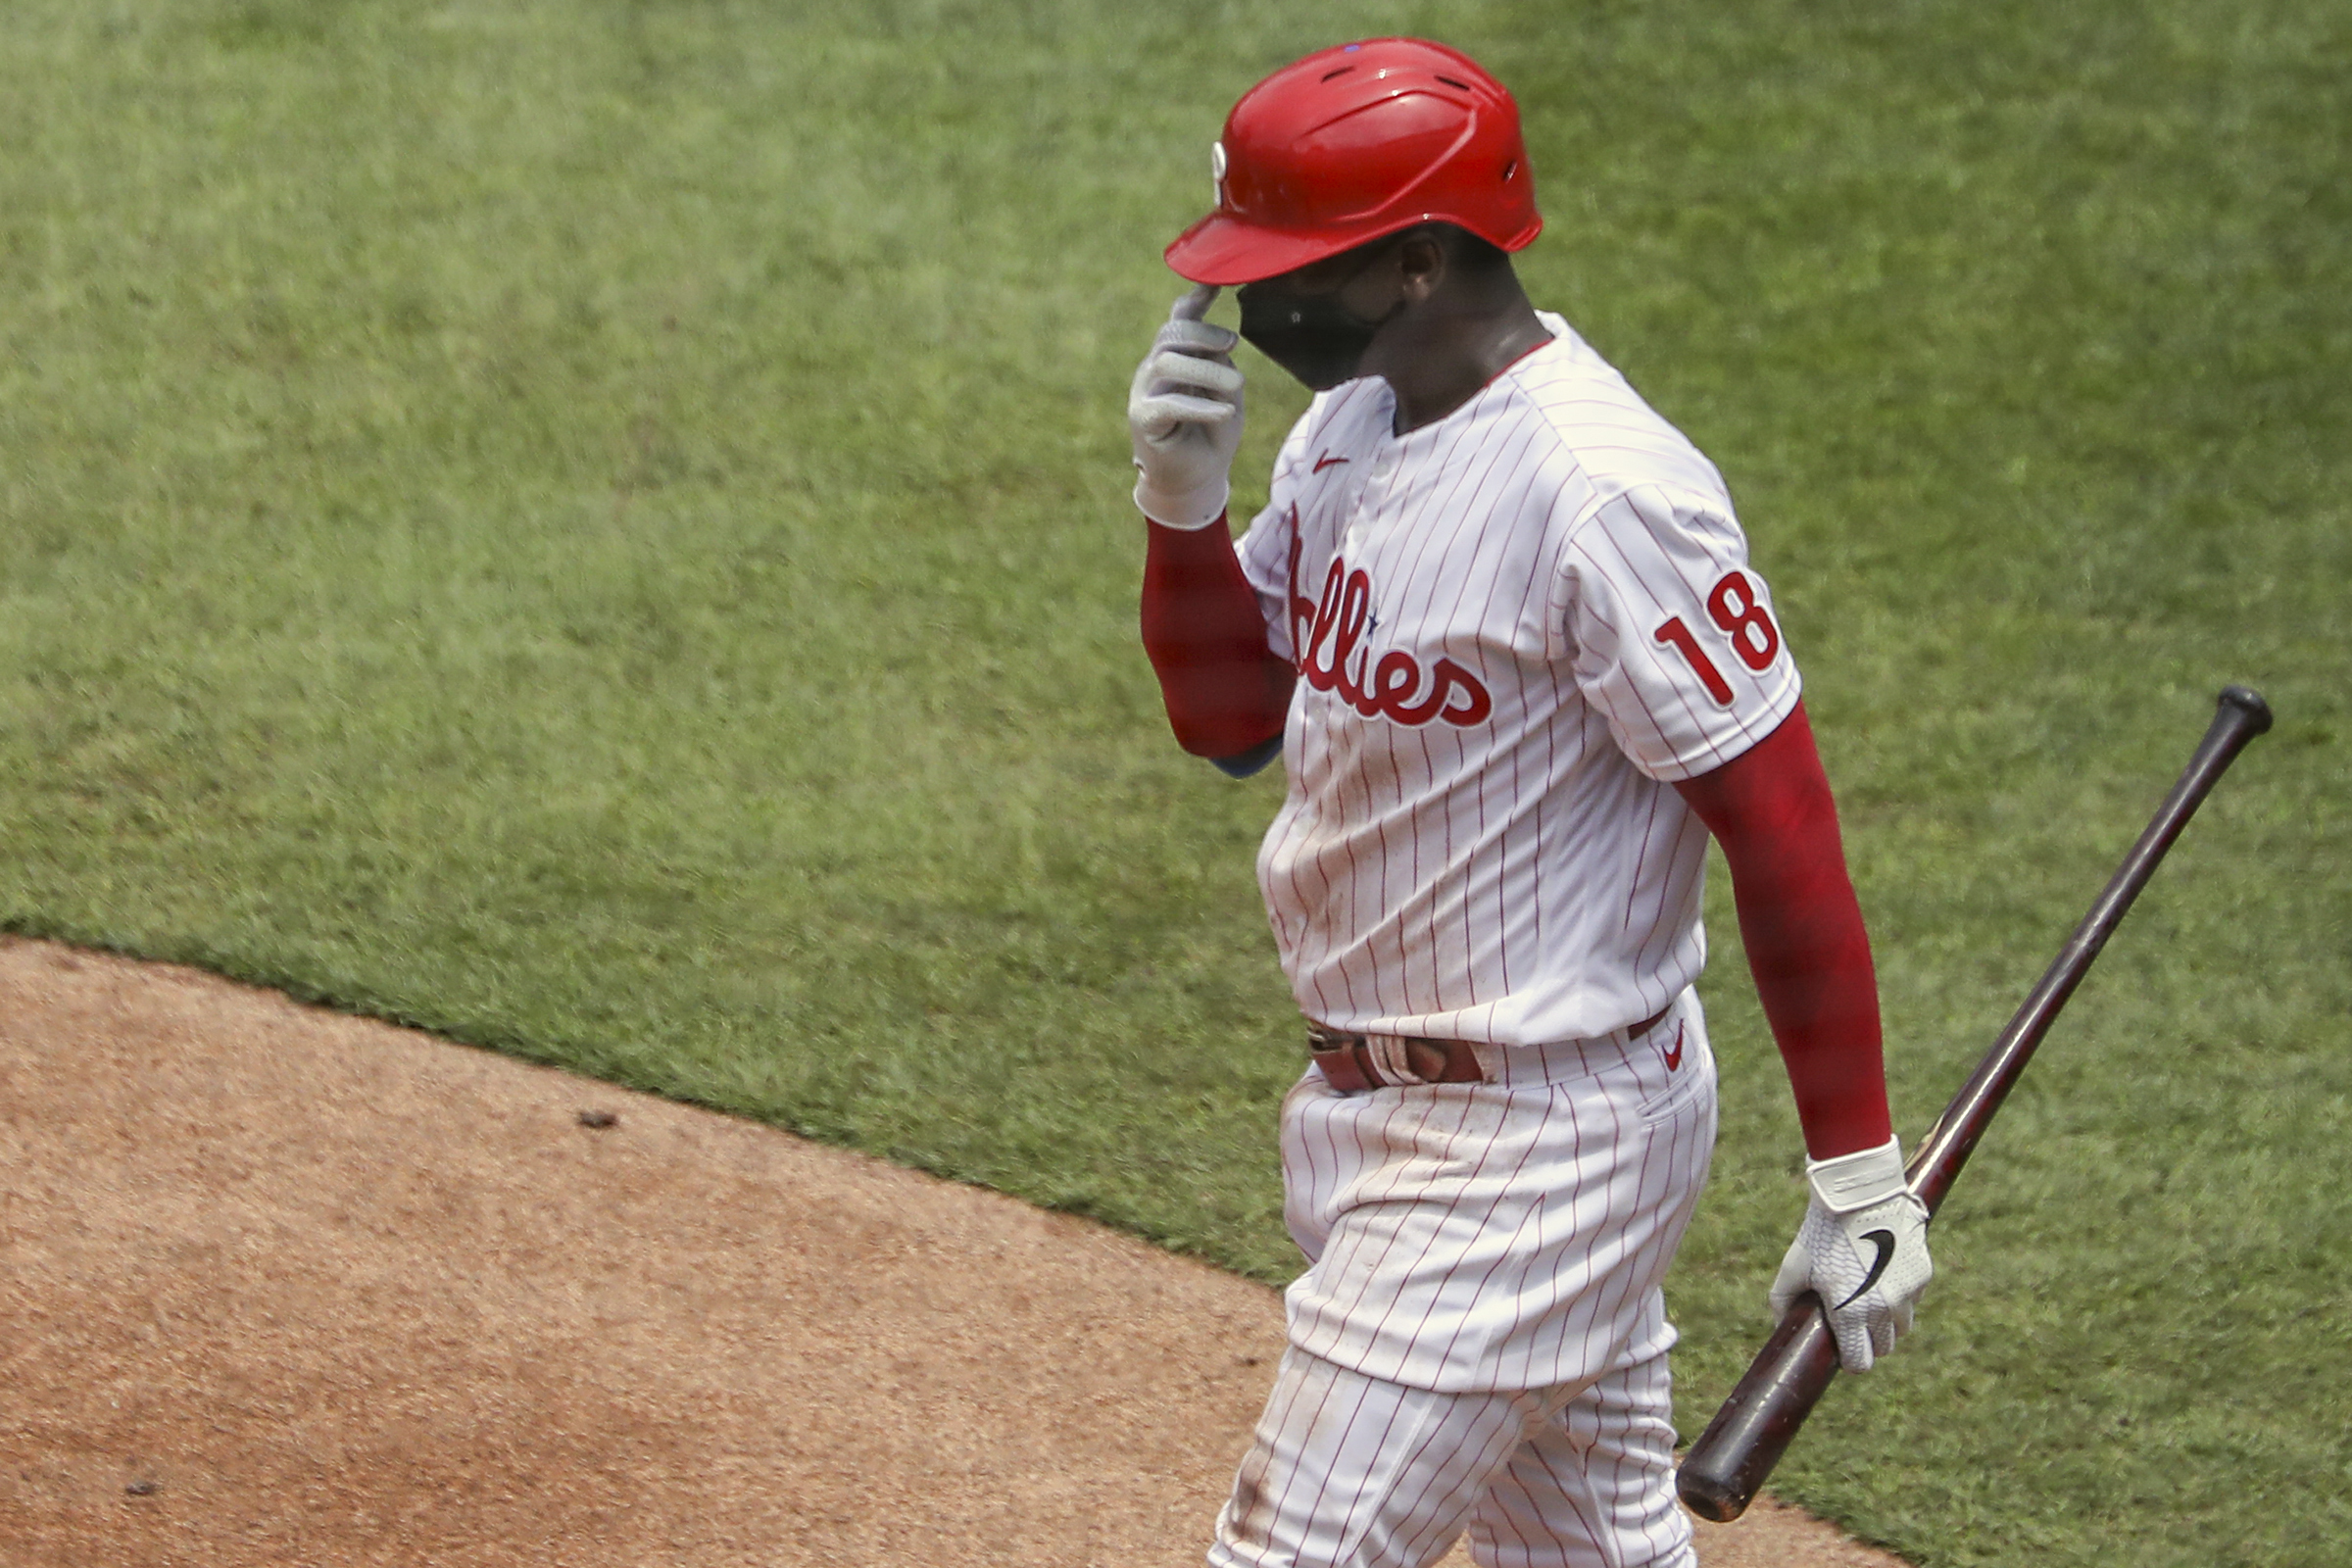 Didi Gregorius is playing with a mask this season because of a chronic  kidney disease